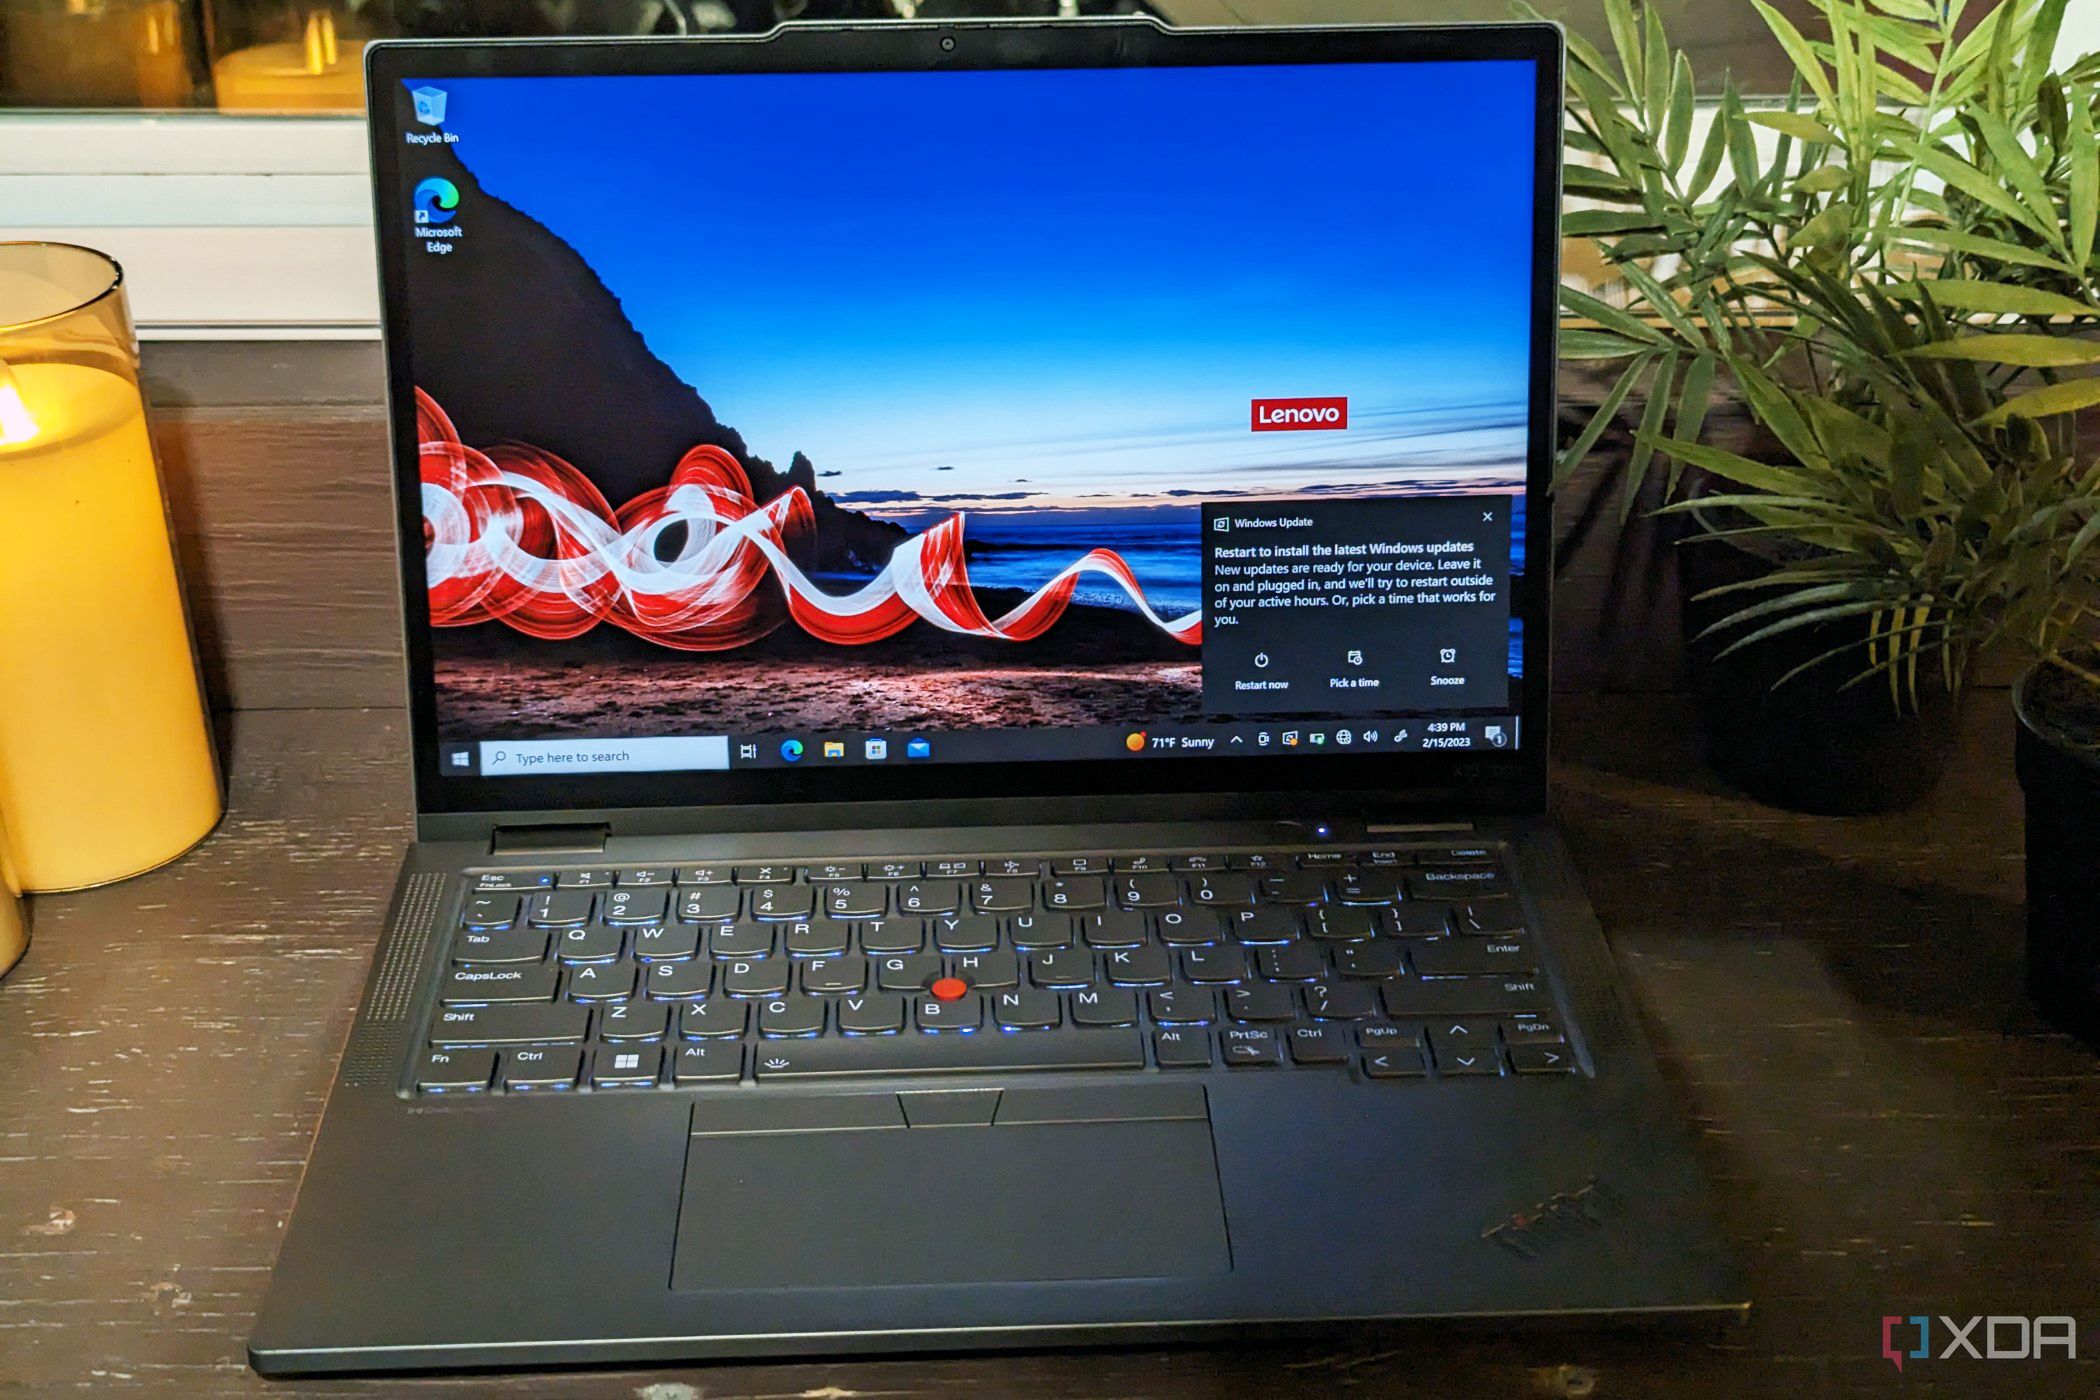 Lenovo ThinkPad X13 Yoga Gen 4 on a desk with candles in the back